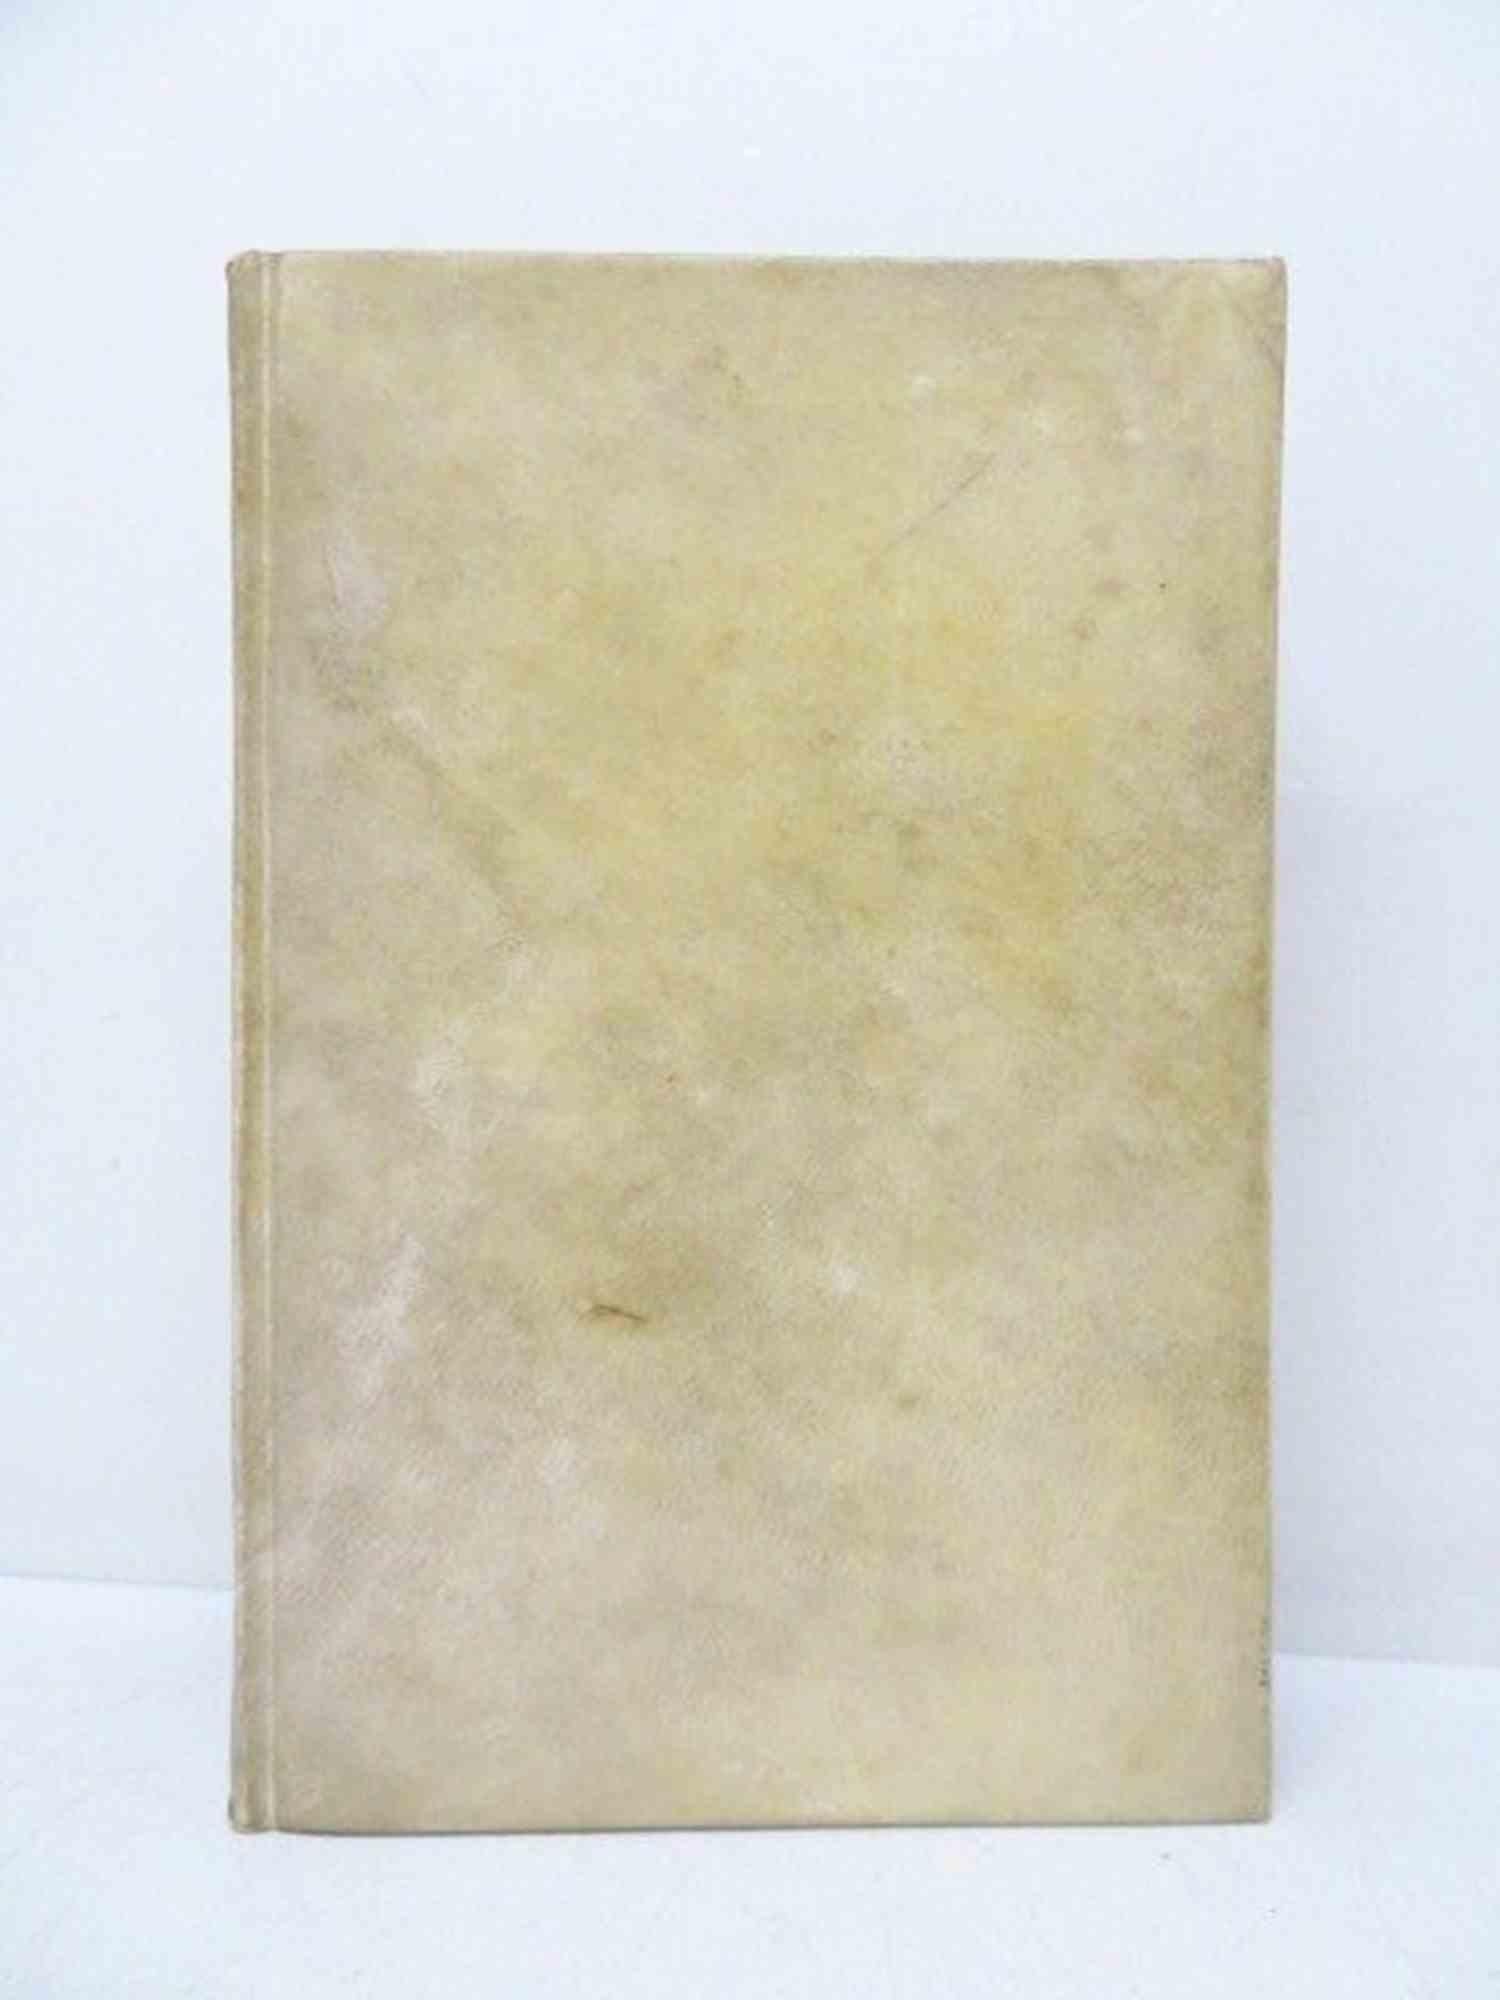 Les Burgraves, une Trilogie - Rare Book by Victor Hugo - 1843 For Sale 7